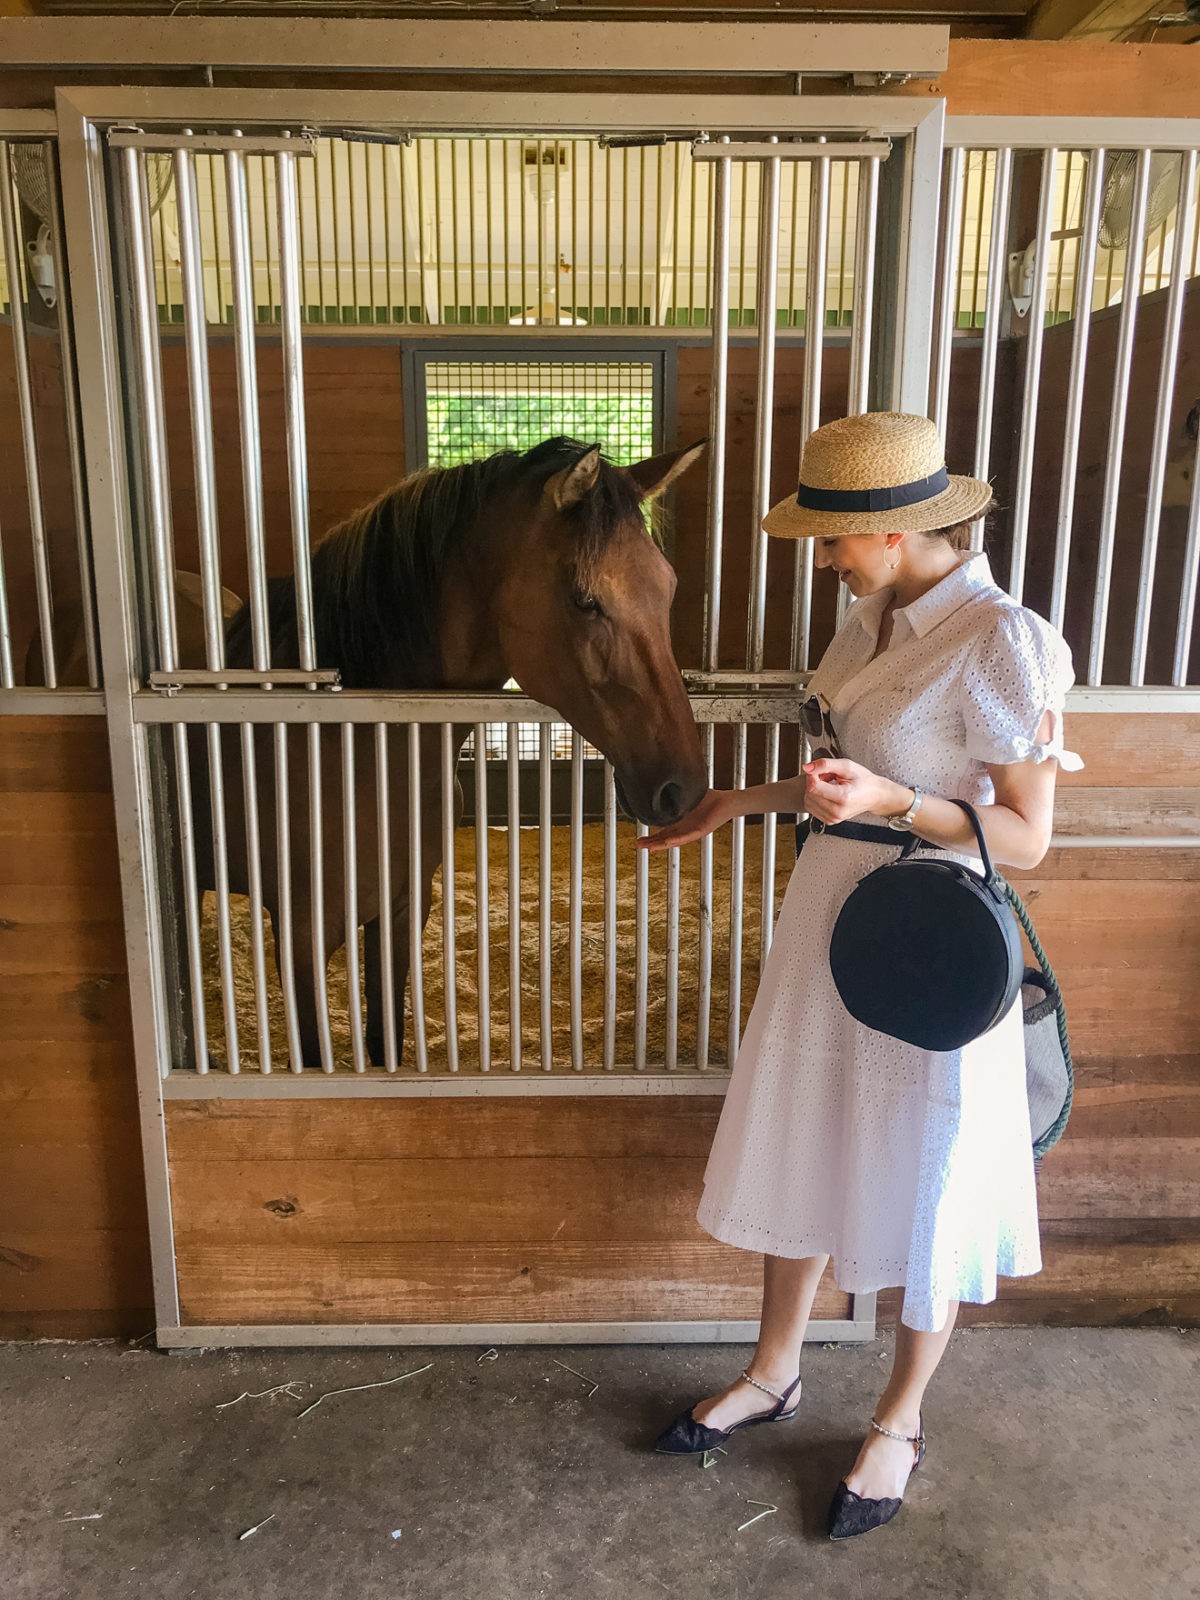 Montage Palmetto Bluff Resort Review by Luxury Travel Blogger Laura Lily: image of a woman feeding a horse in the Palmetto Bluff Resort Longfield stables. 